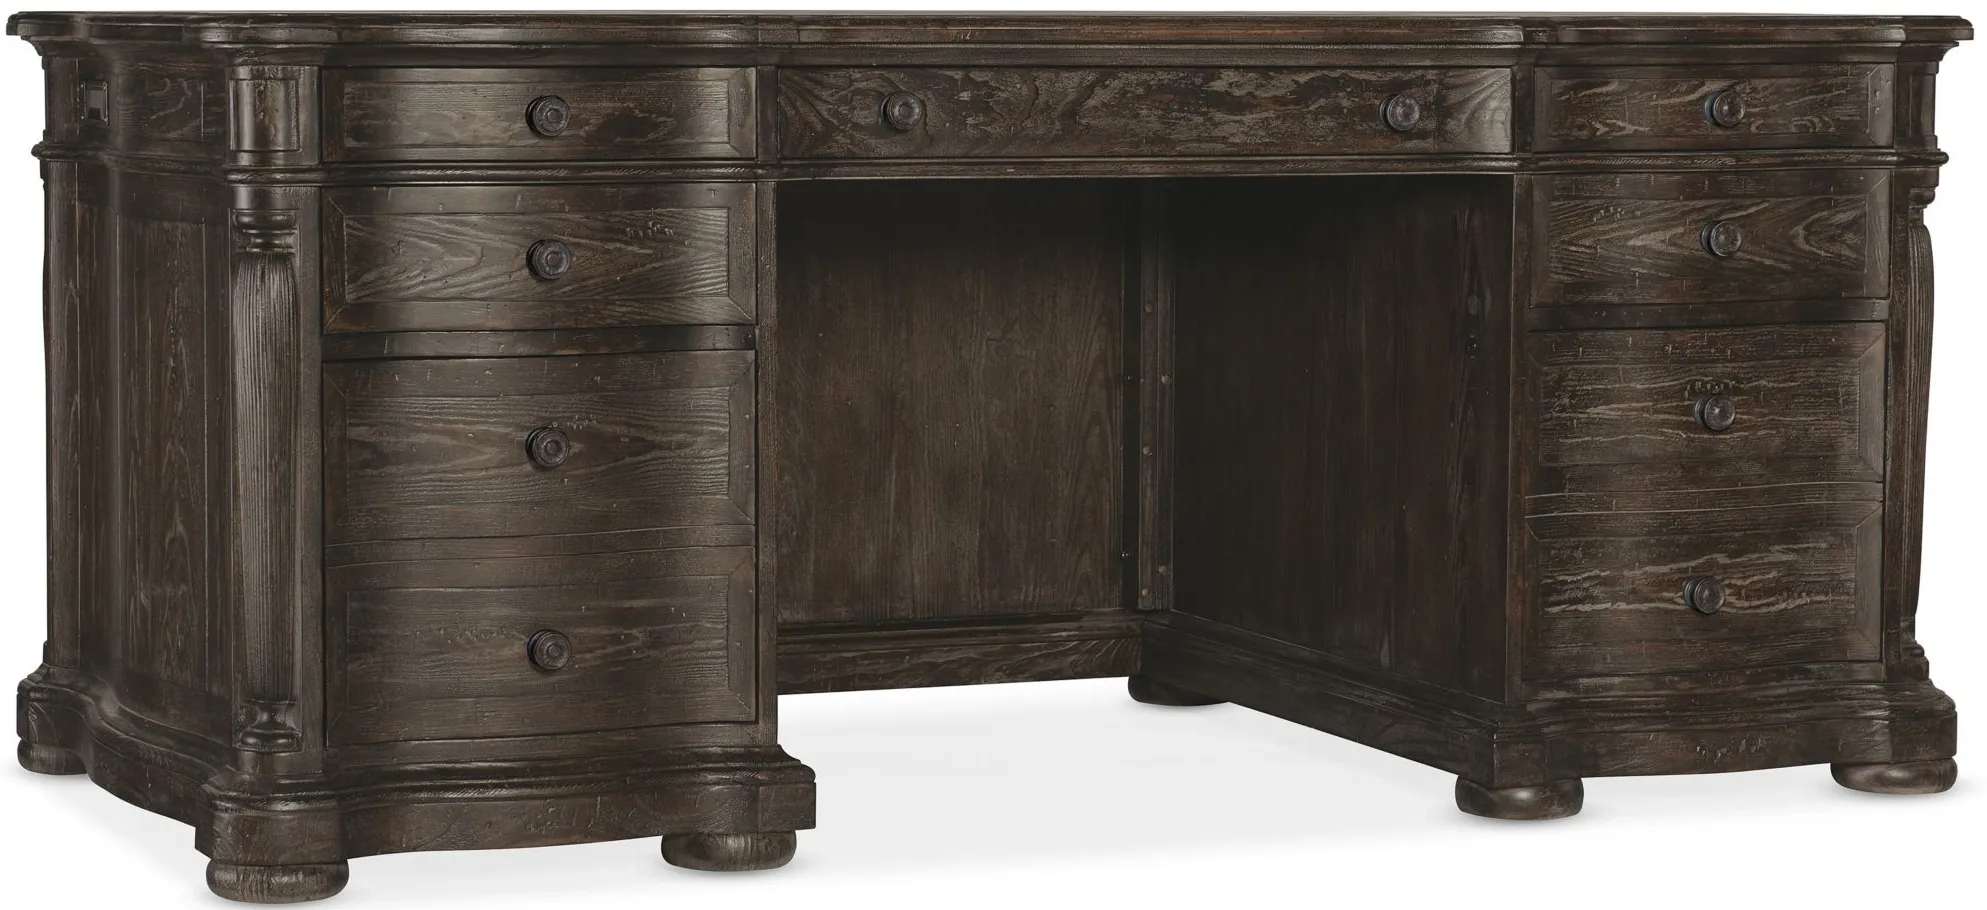 Traditions Executive Desk in Brown by Hooker Furniture